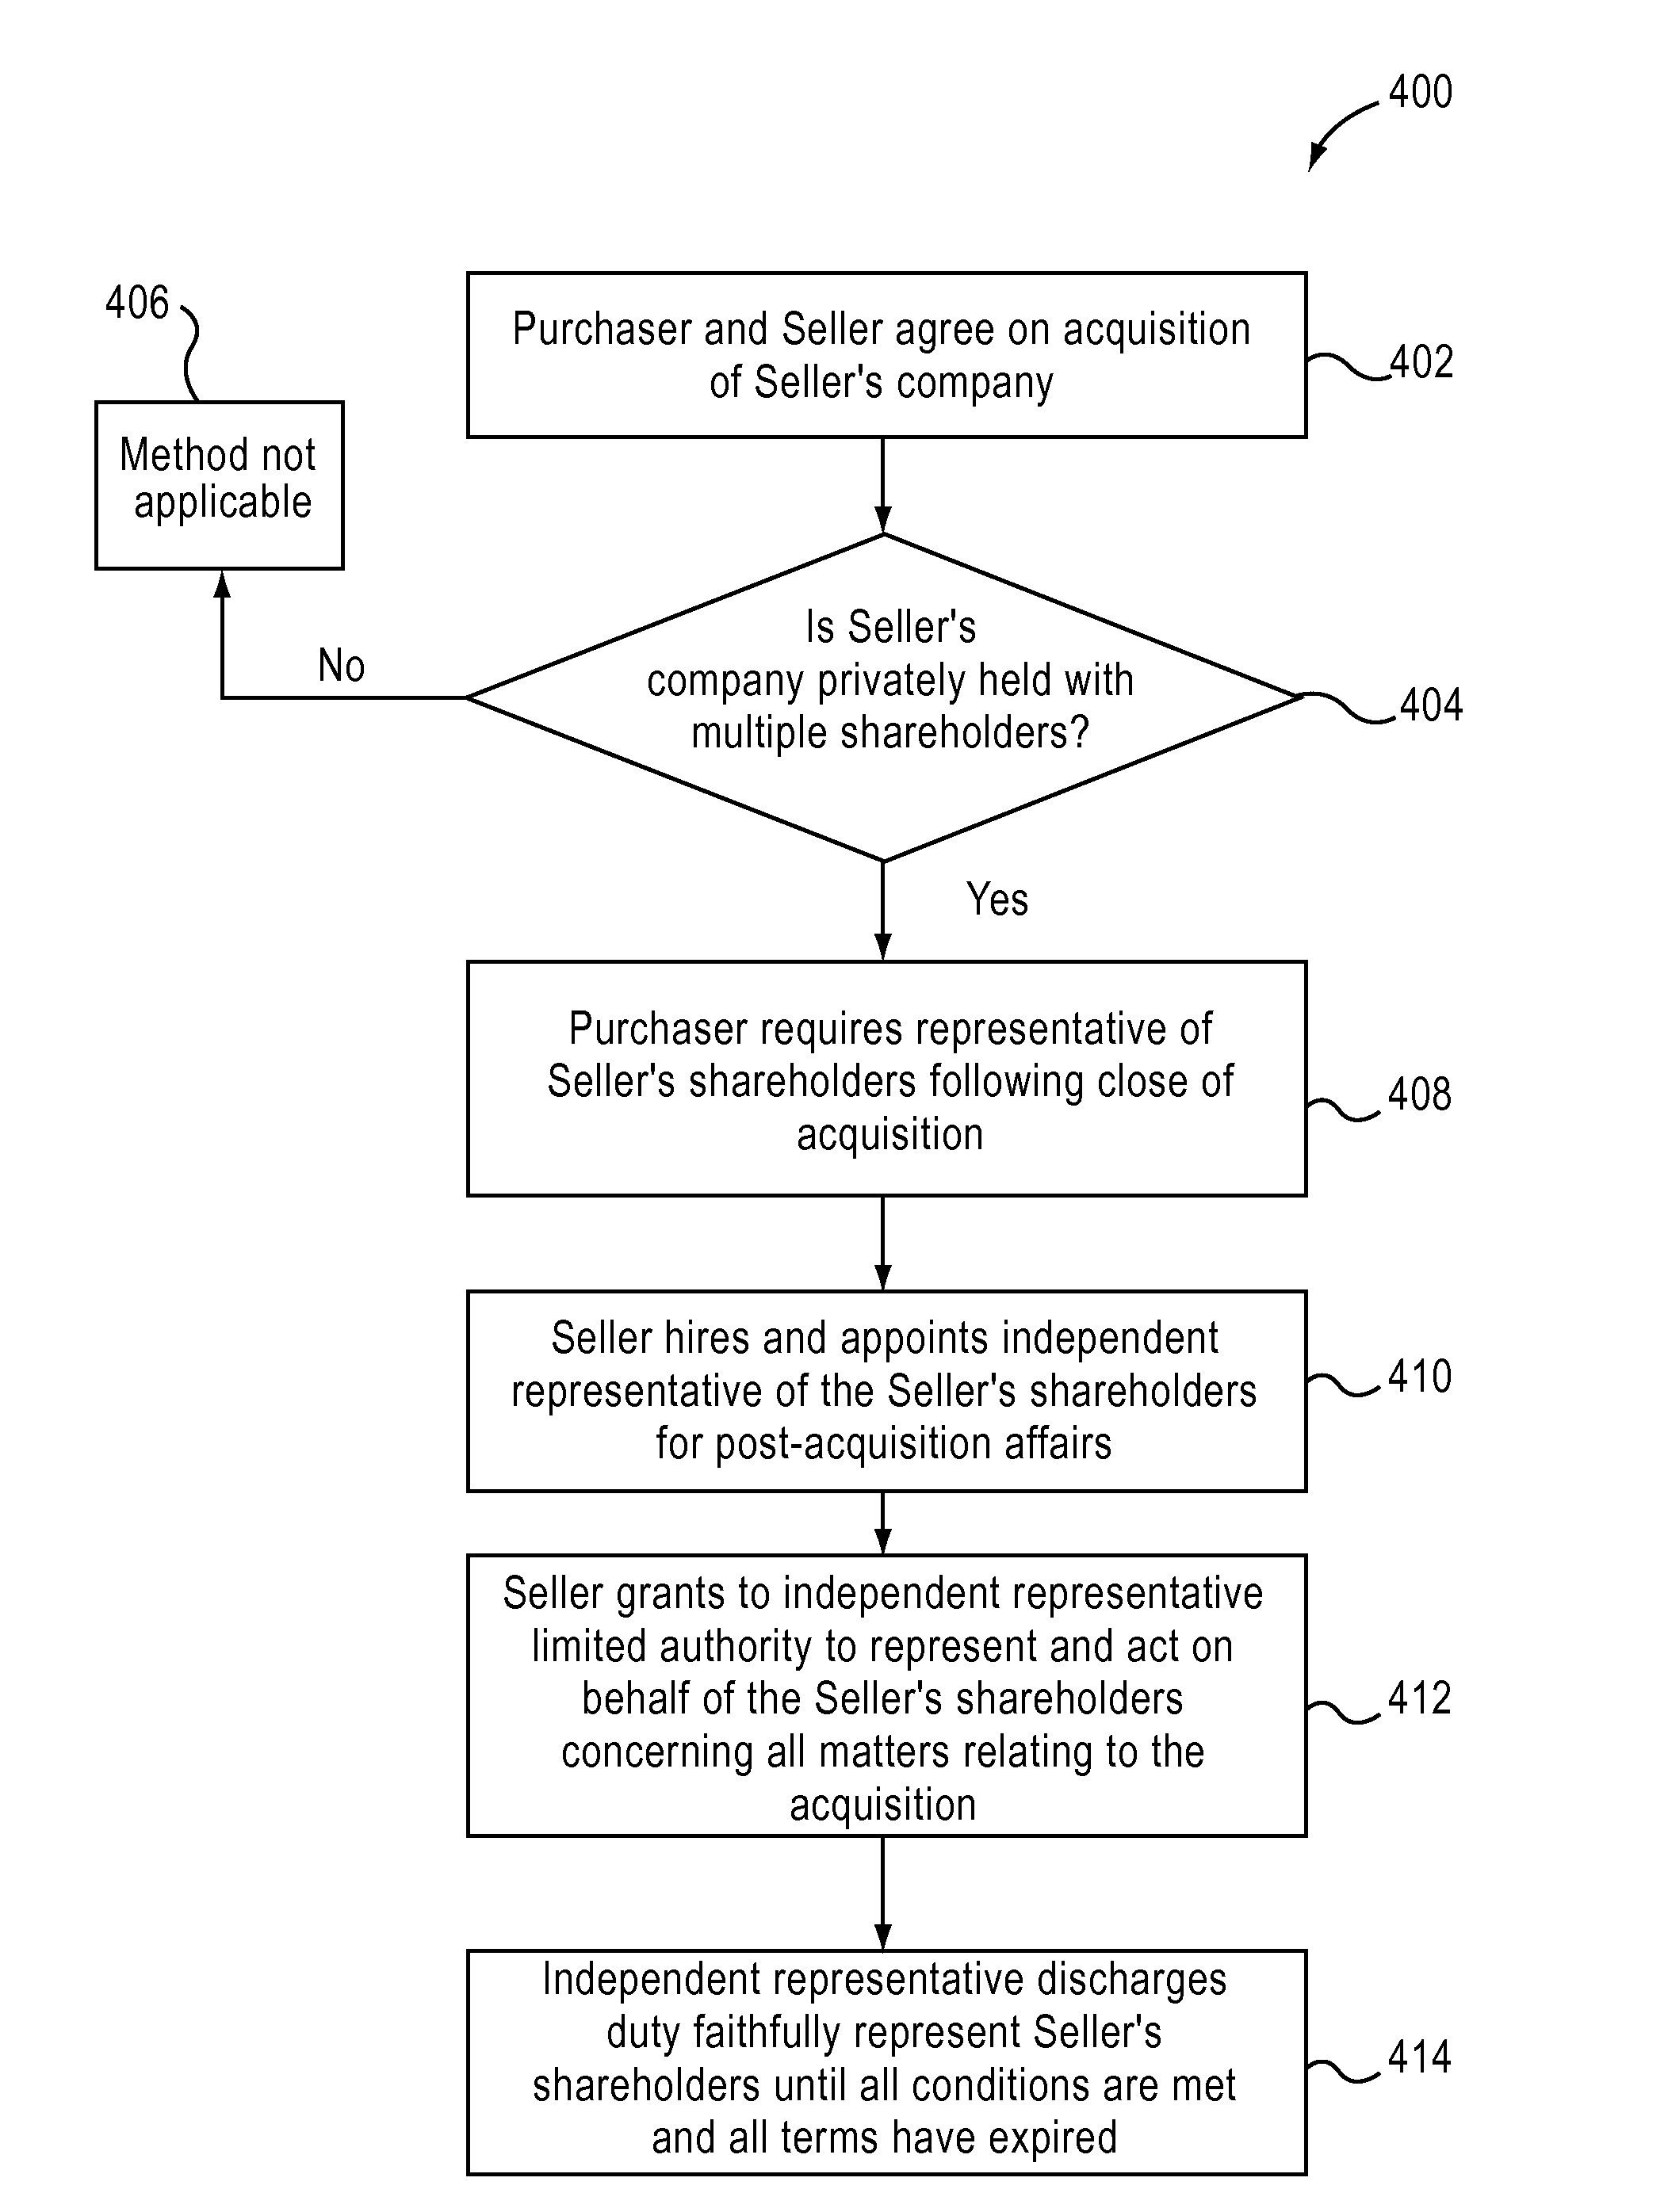 System and Method for Independently Representating Multiple Shareholders in the Sale of a Business